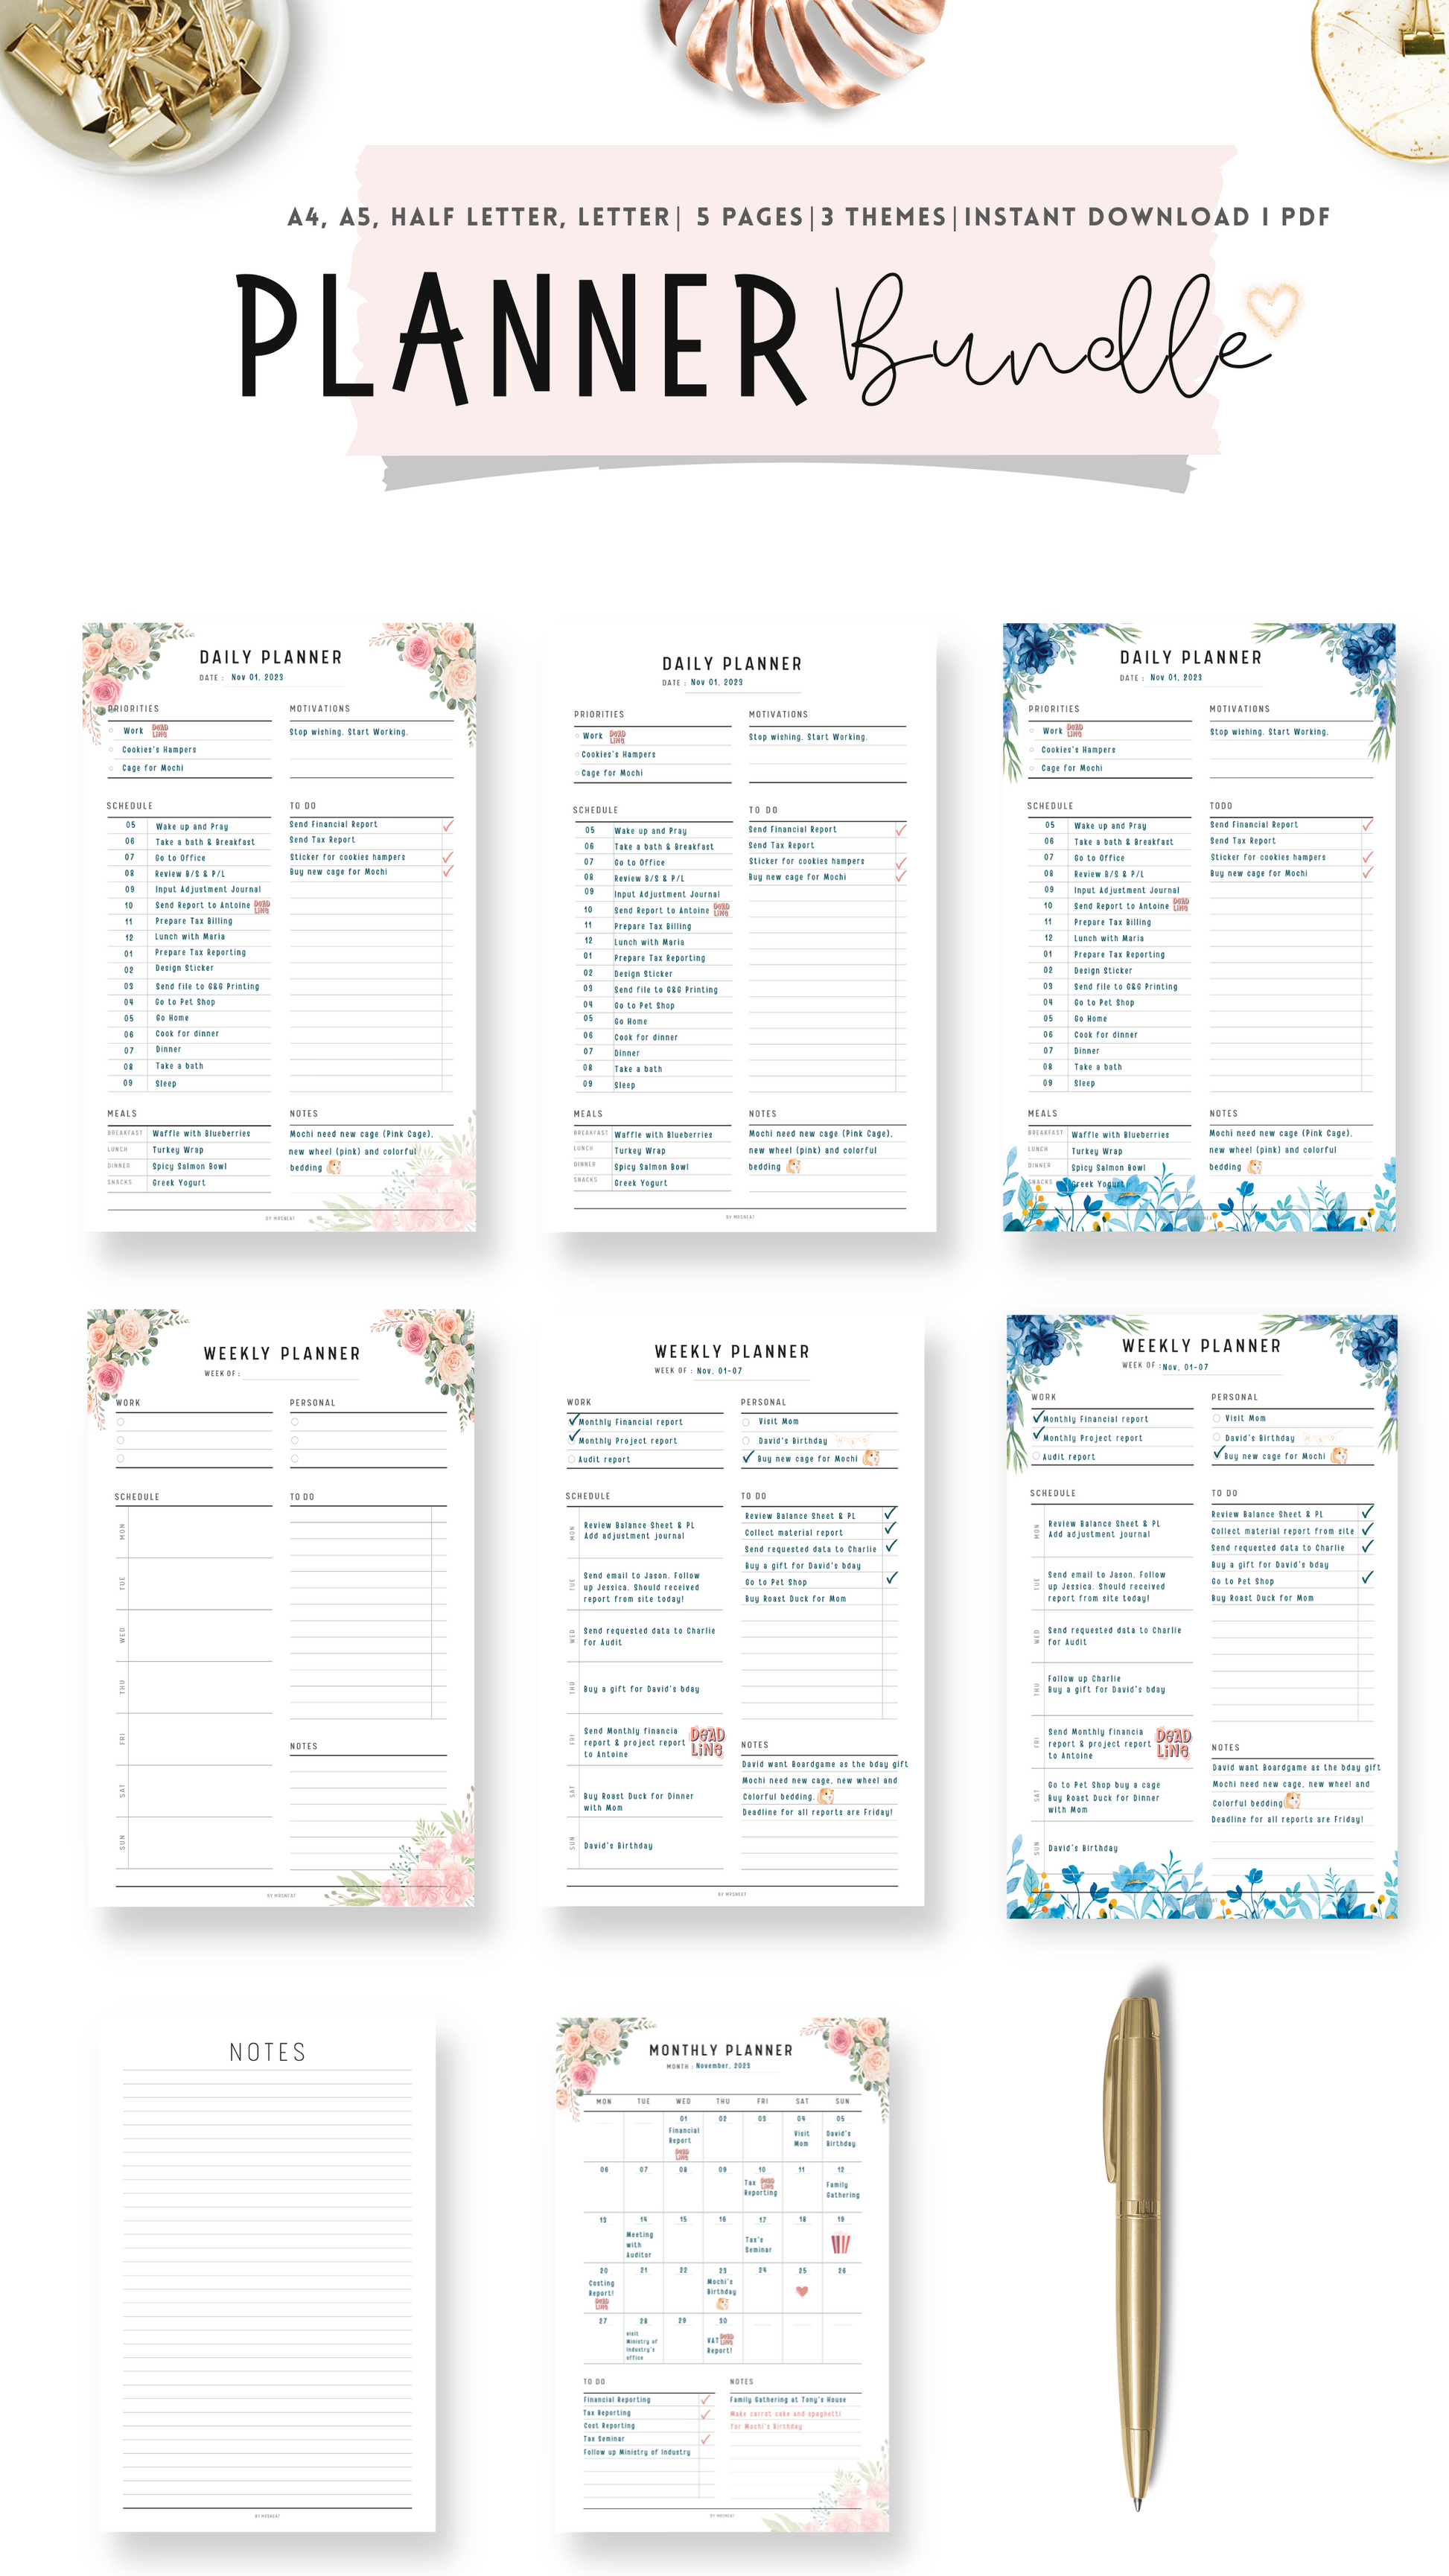 7 Pages of Daily Planner, Weekly Planner and Monthly Planner in Blue Floral, Pink Floral and Neutral